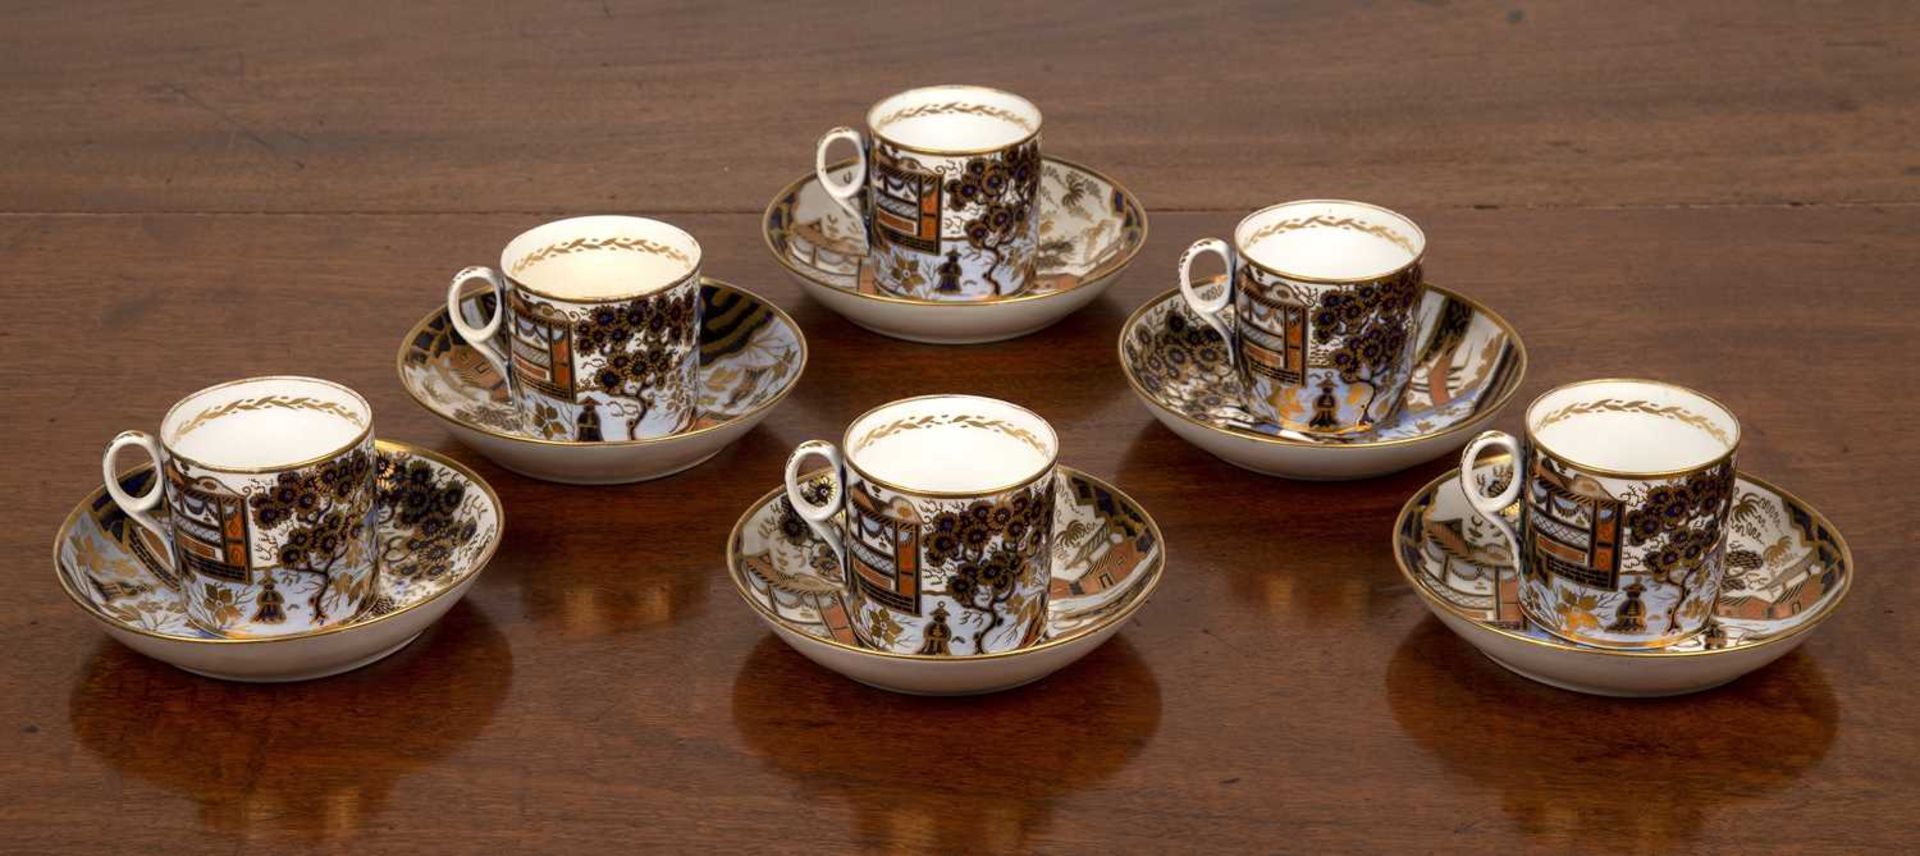 New Hall porcelain Early 19th Century, set of six coffee cans and saucers in the 1163 Imari